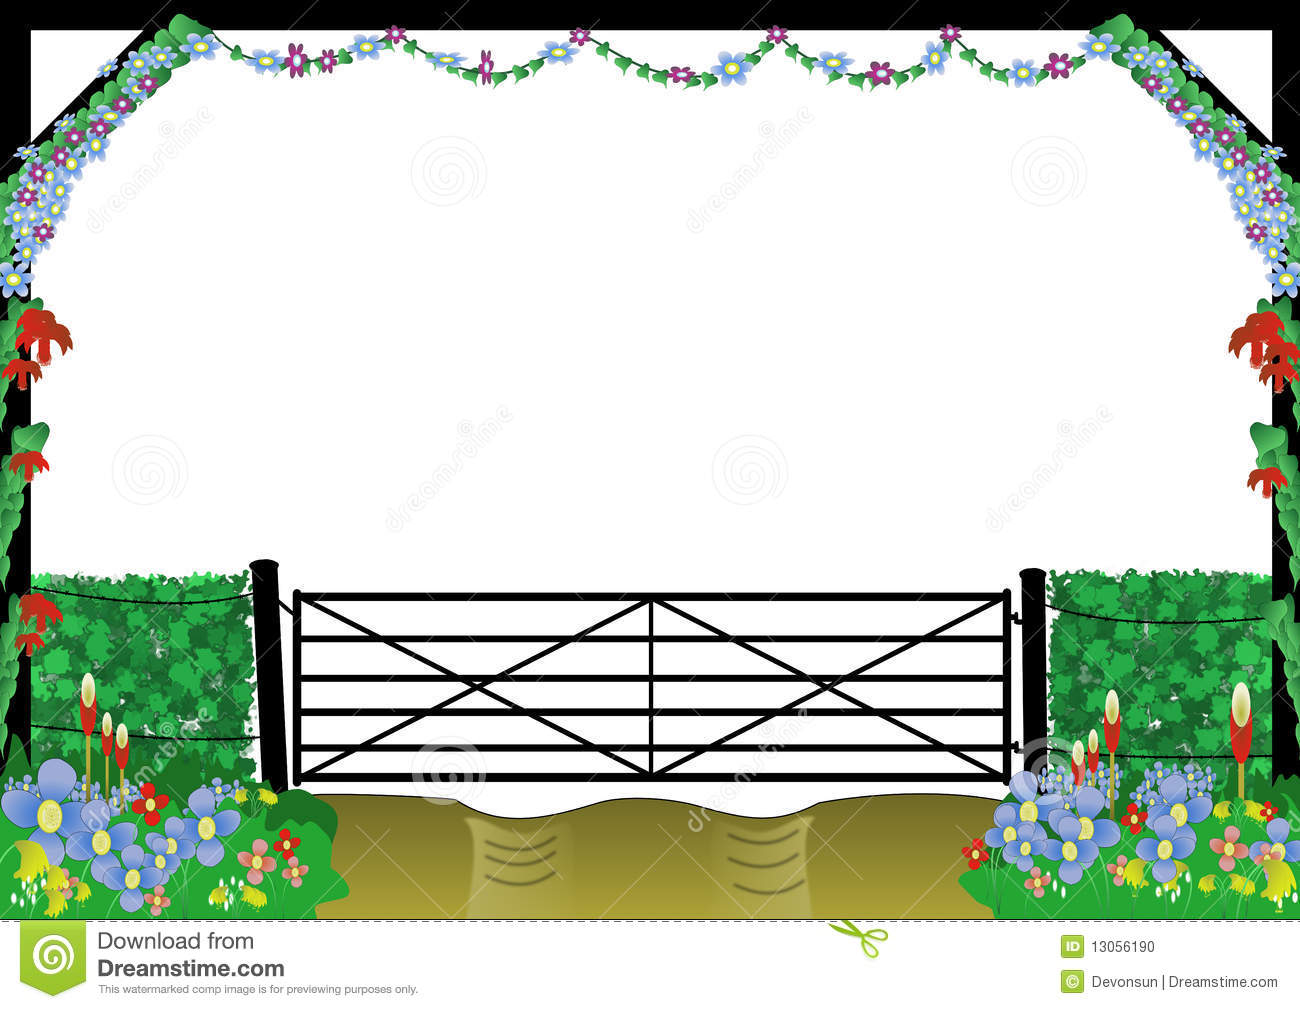 Frame Of Countryside With Silhouette Gate And Different Flowers